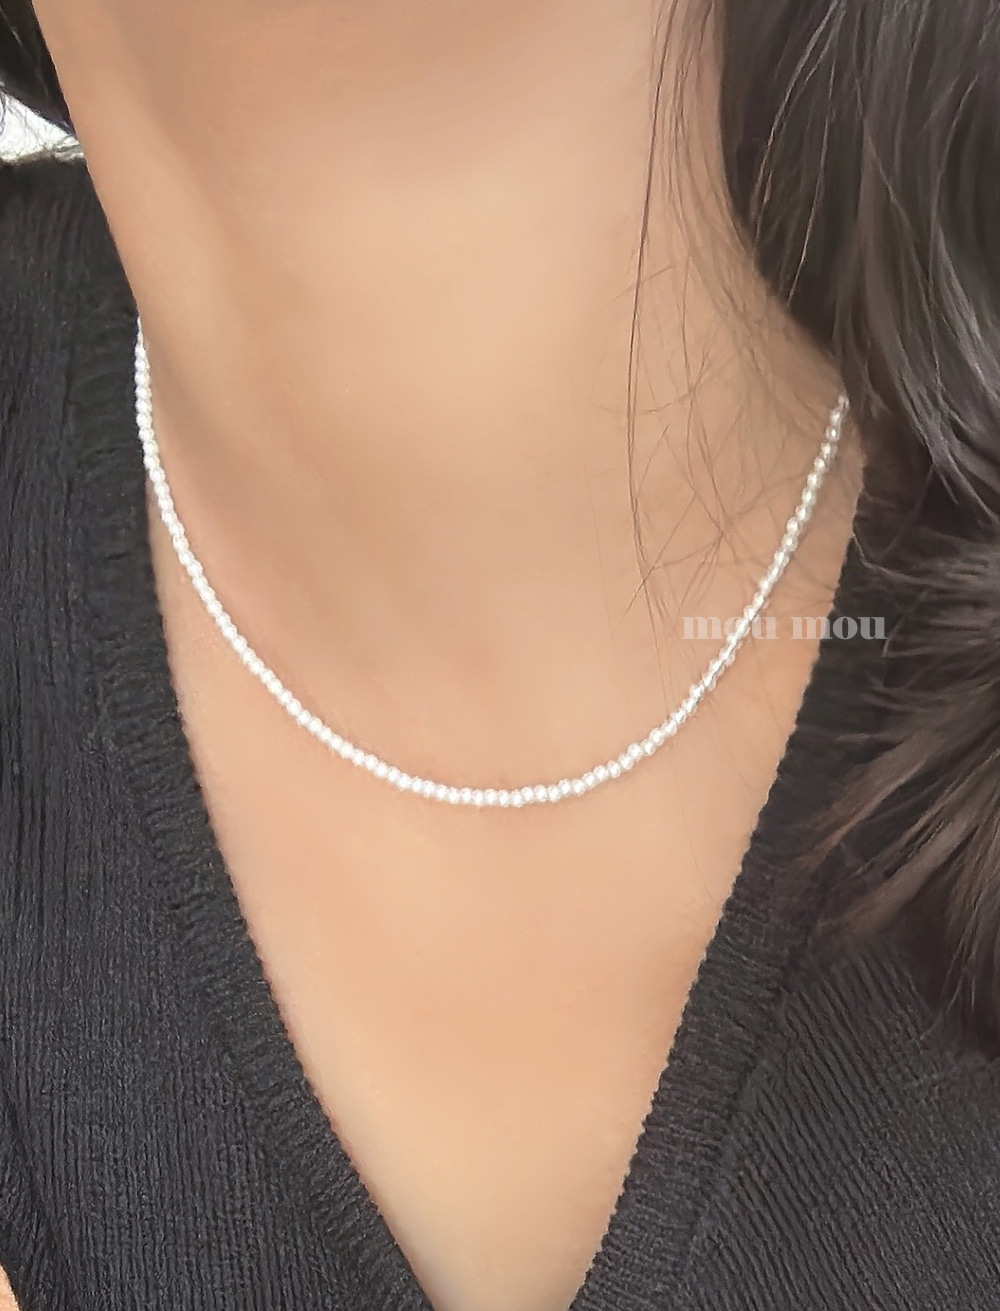 2 mm 스왈 진주 목걸이 2 mm pearl necklace